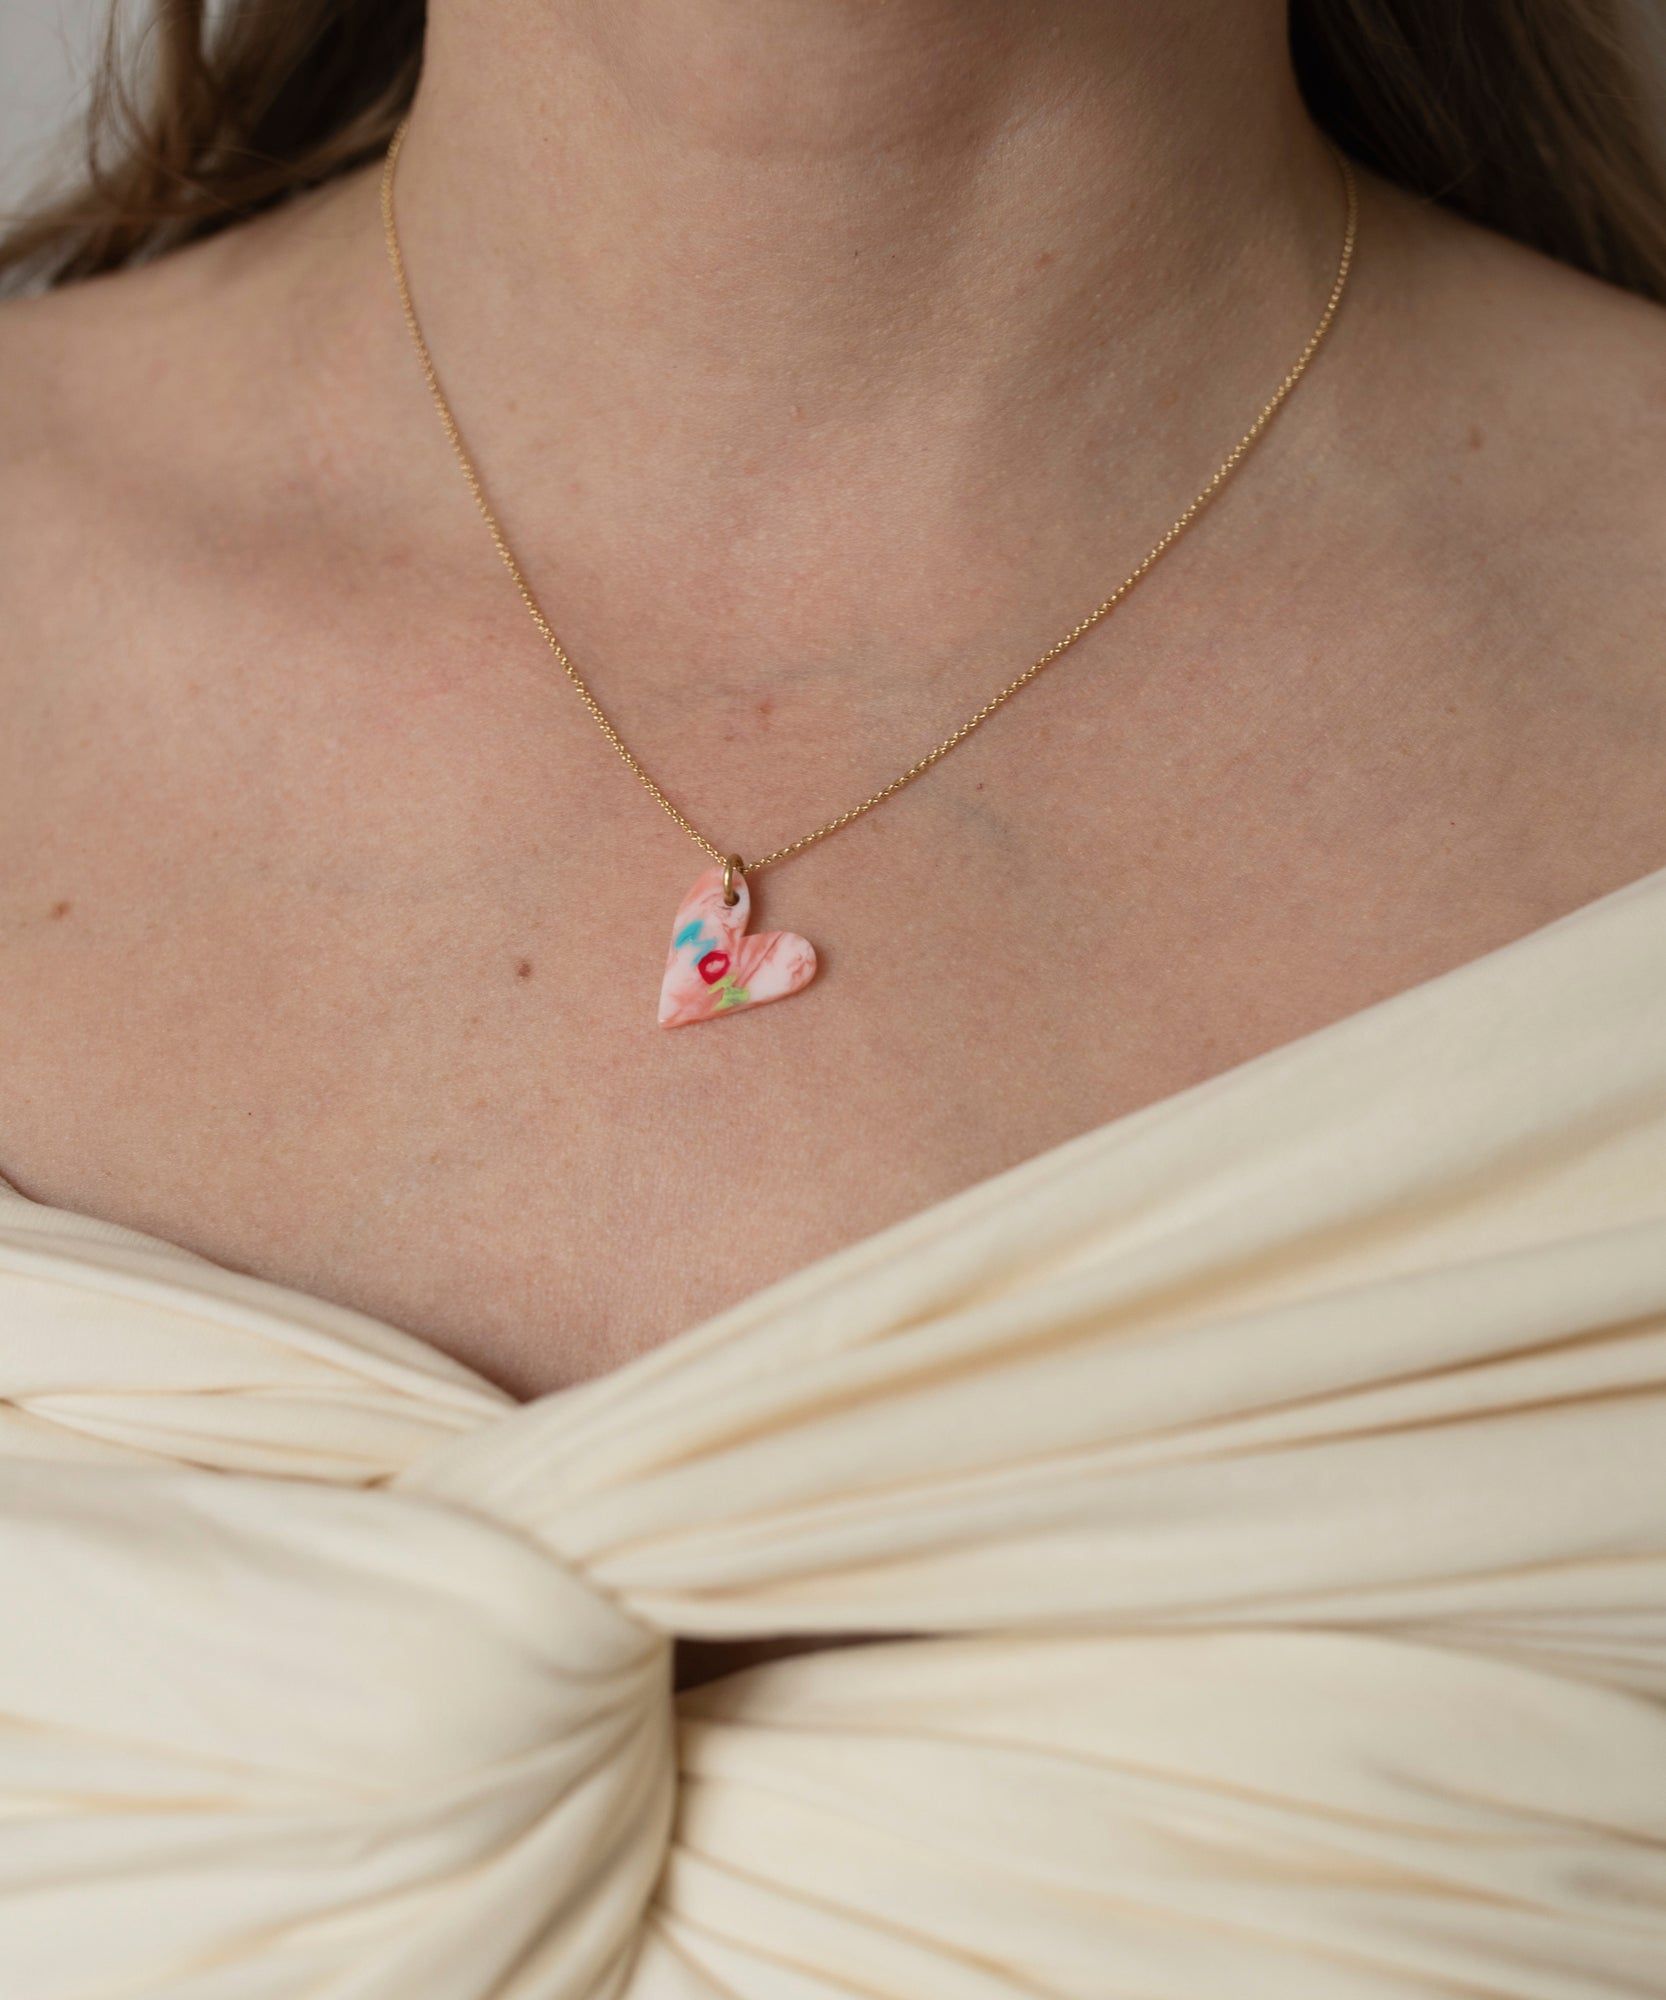 A close-up of a woman wearing a Pledges Of Tenderness LOVE Necklace by WALD Berlin, with a heart-shaped pendant, made in Germany, set against her cream dress.